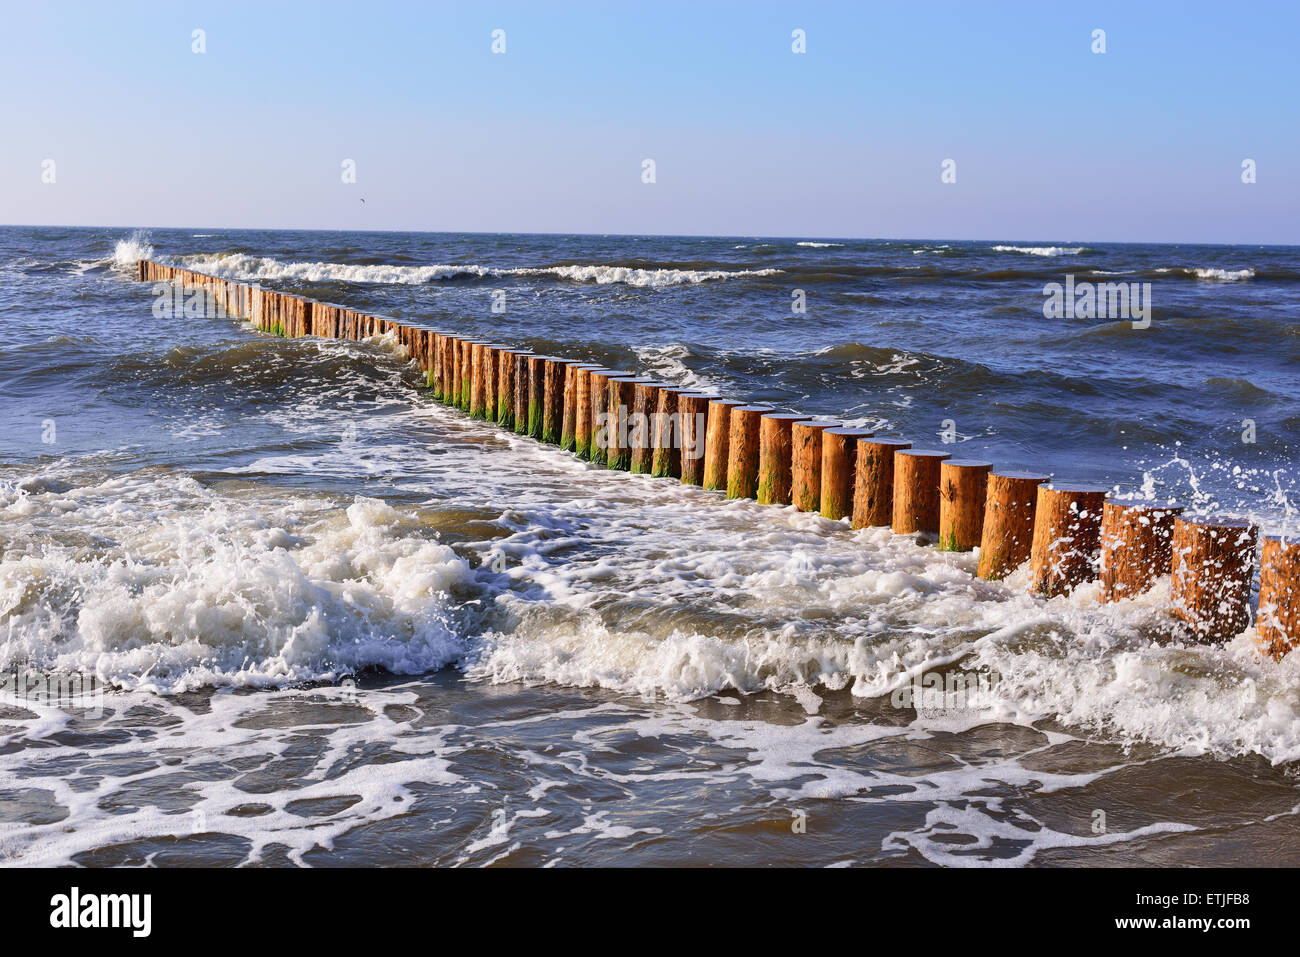 Wooden wave breakers on a coast of Baltic Sea. Stock Photo